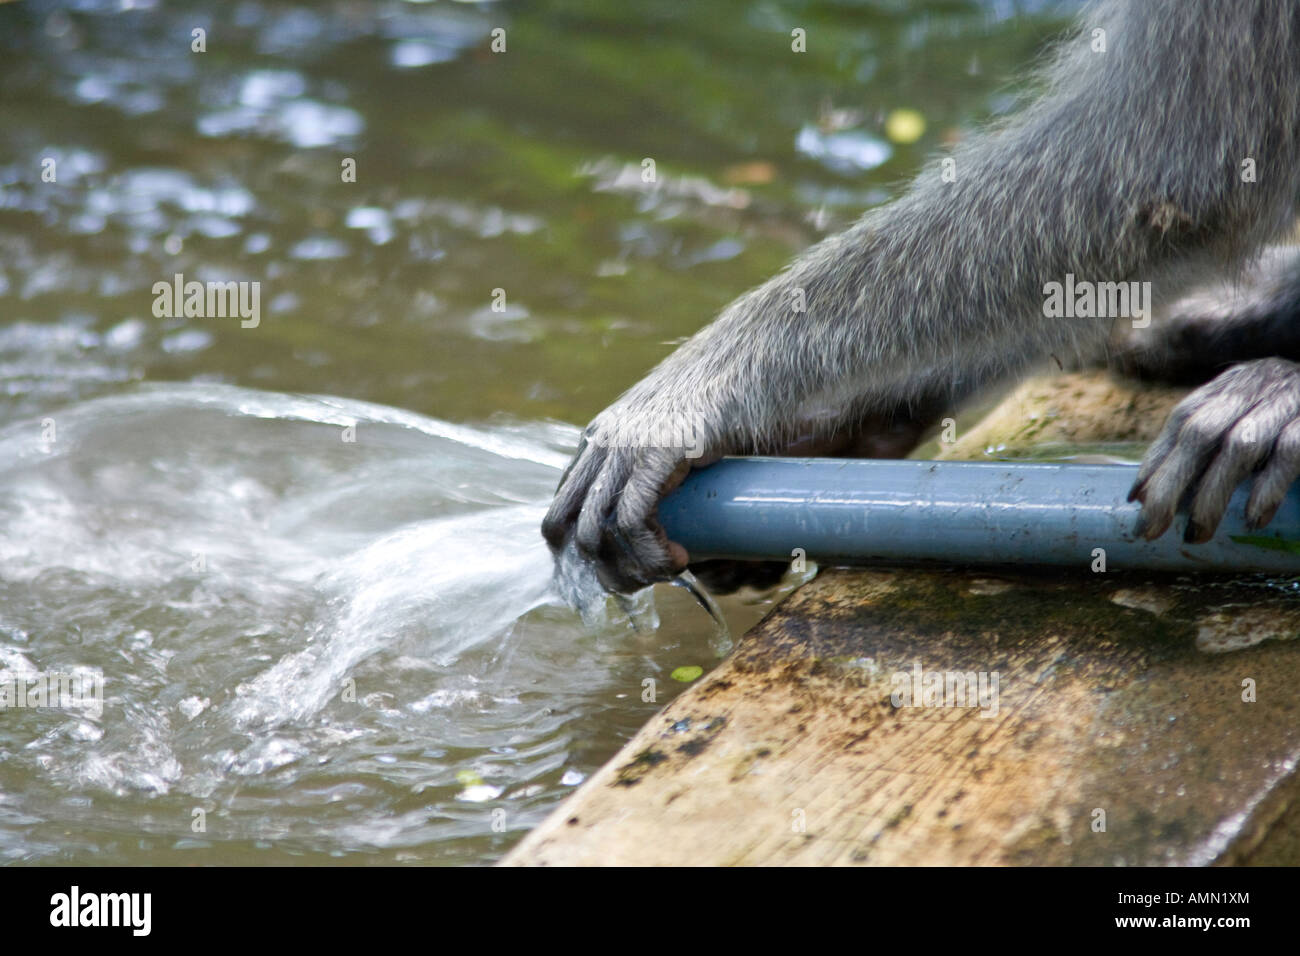 Playing with Water Pipe Long Tailed Macaques Macaca Fascicularis Monkey Forest Ubud Bali Indonesia Stock Photo